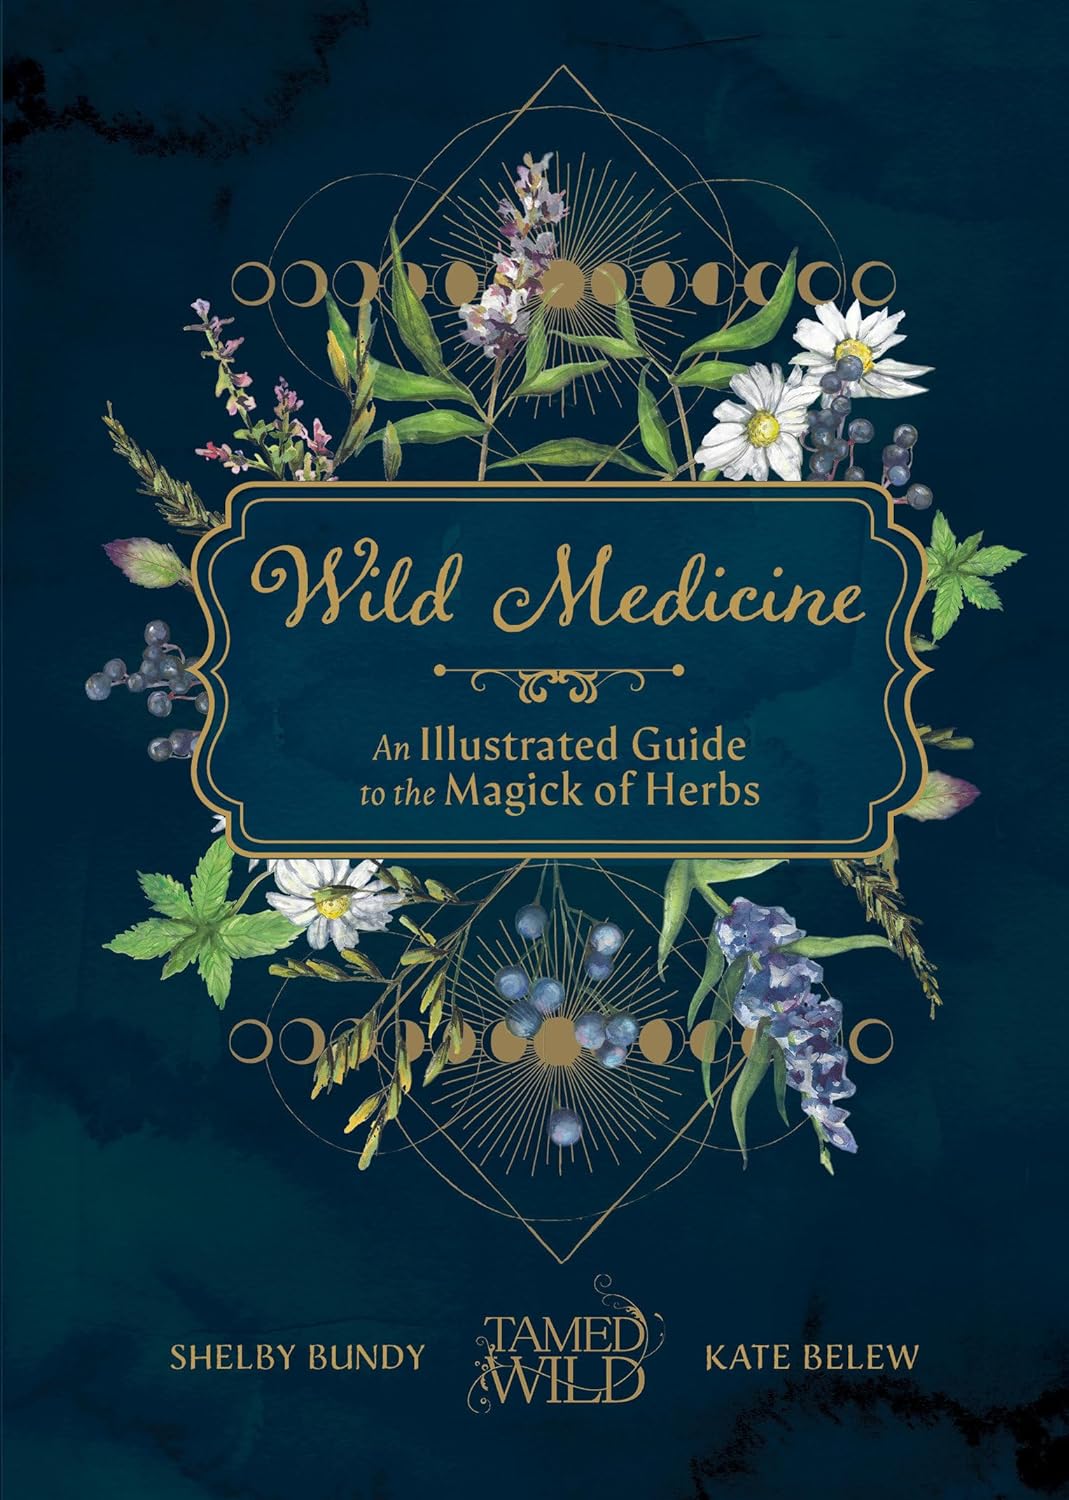 Wild Medicine: An Illustrated Guide to the Magick of Herbs